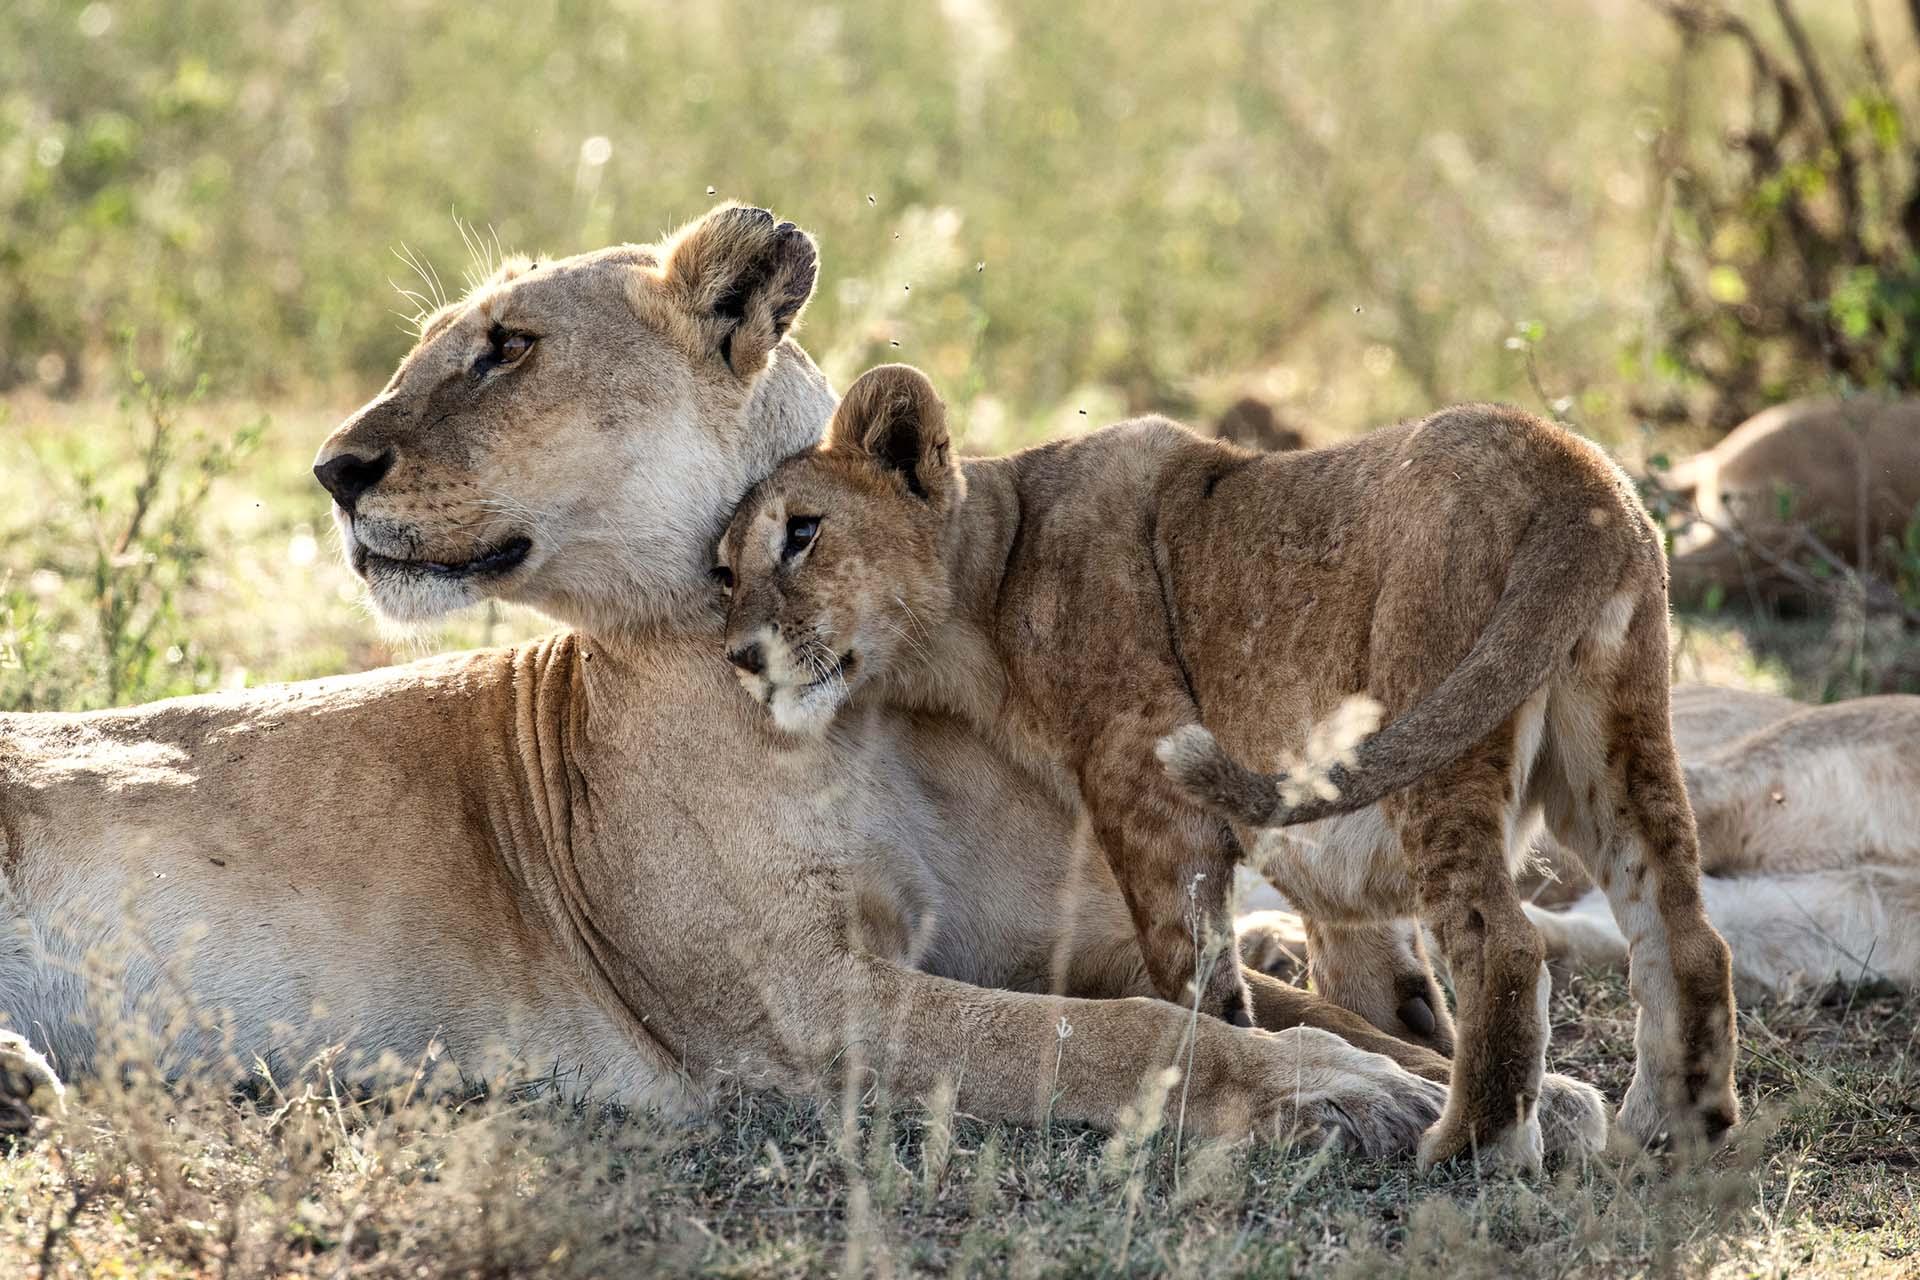 Lions in the central Serengeti